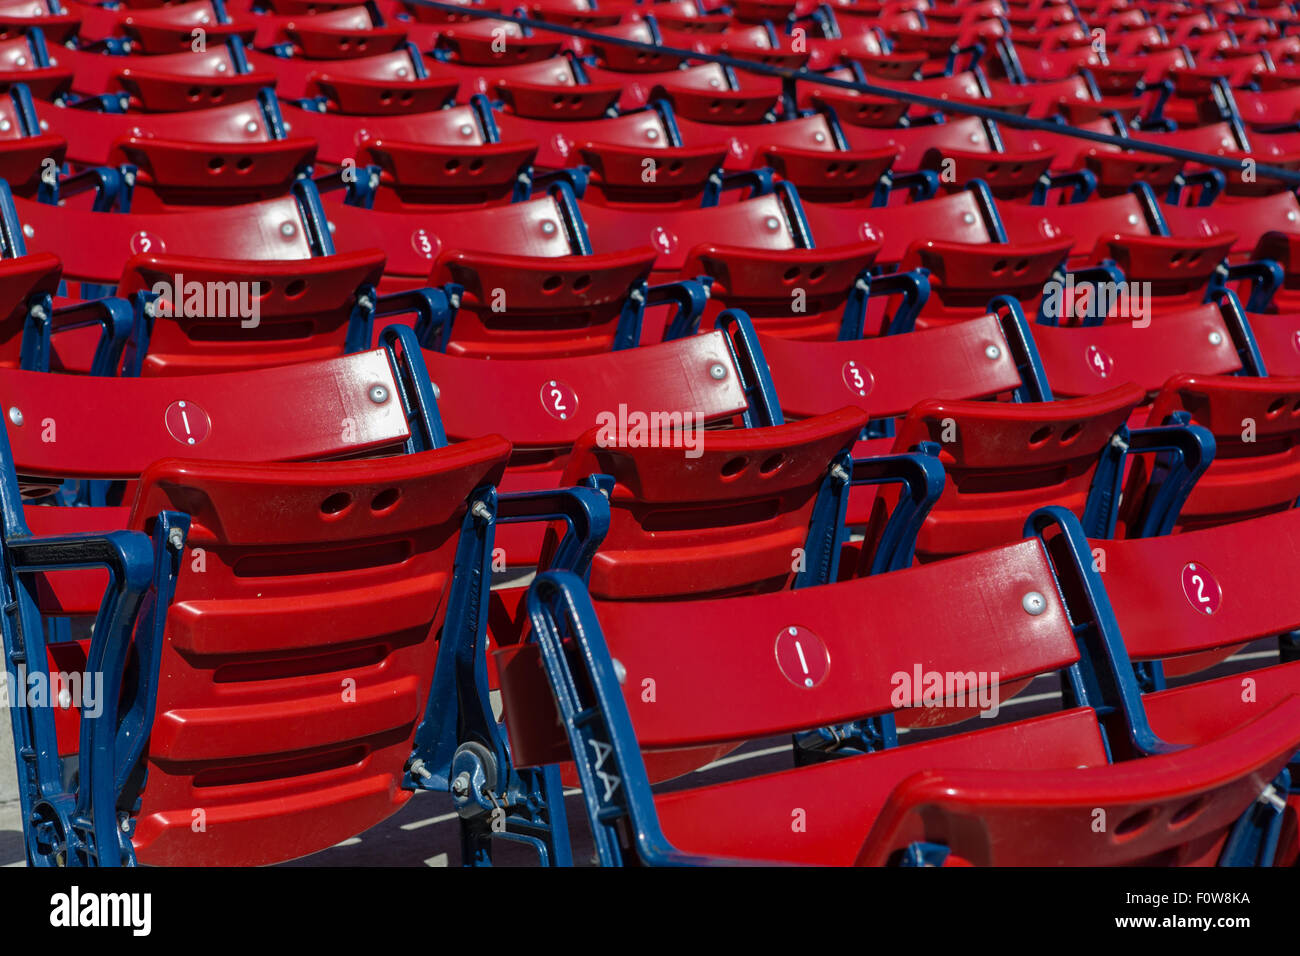 Boston Red Sox Fenway Park located in Kenmore Square in Boston, Massachusetts. Stock Photo